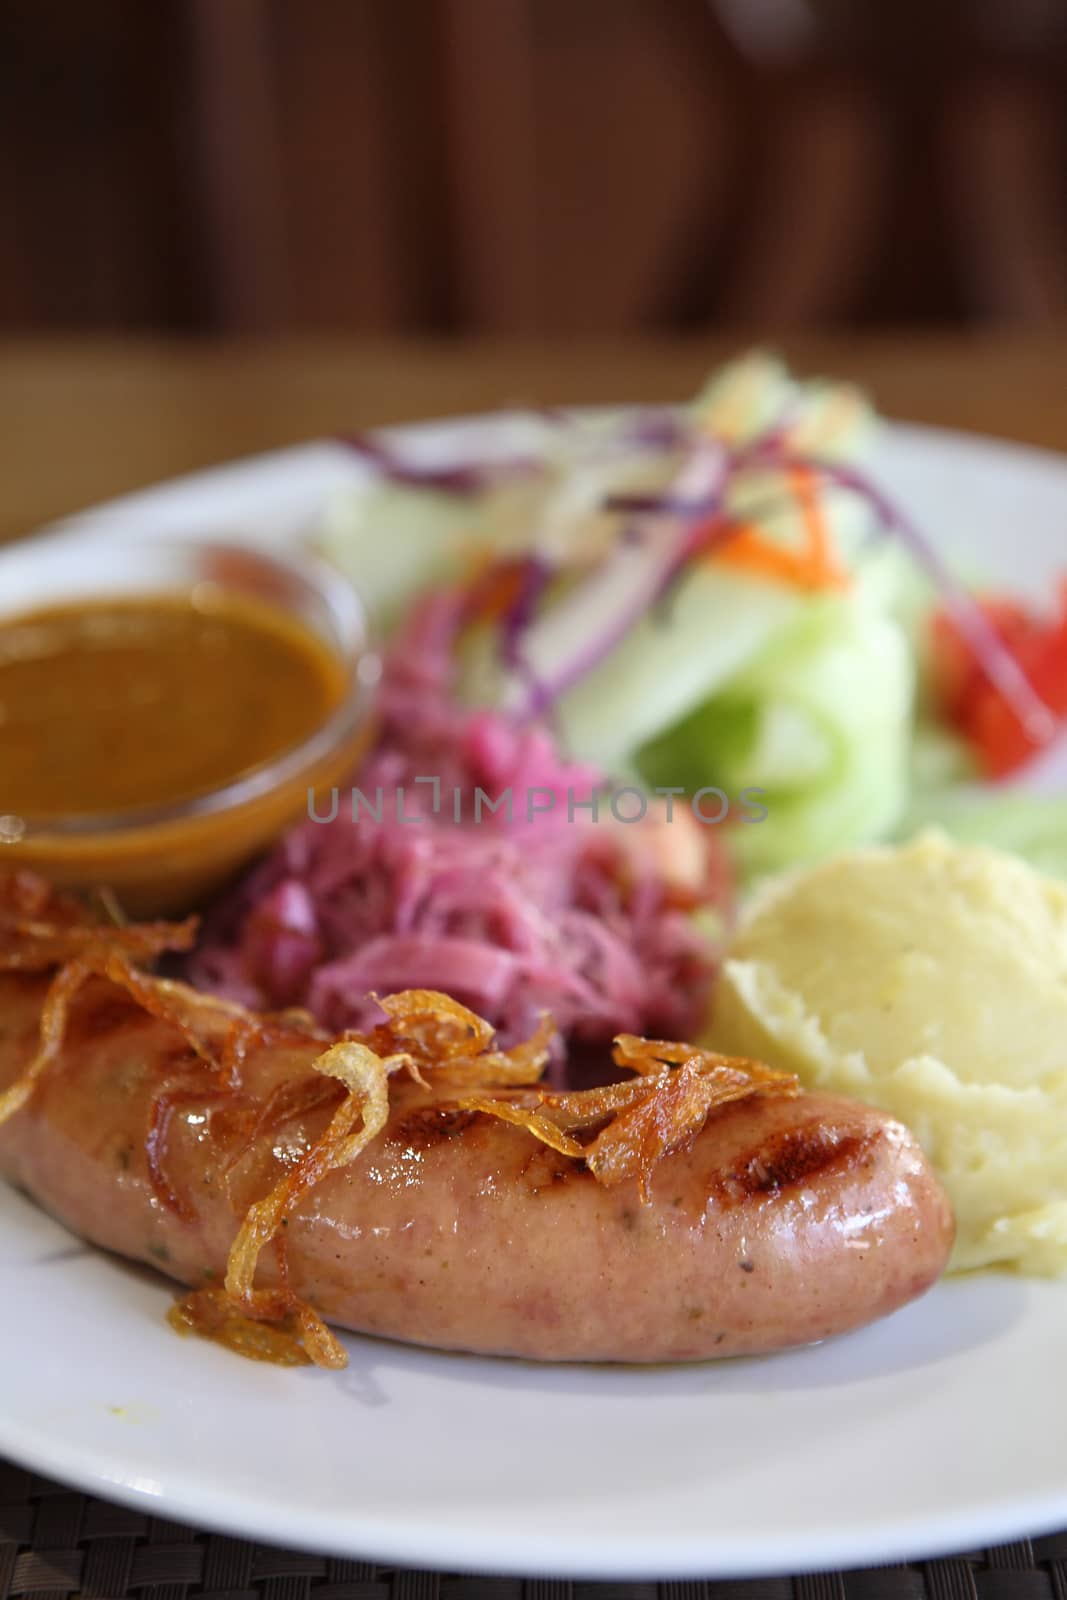 Sausage with salad on wood background